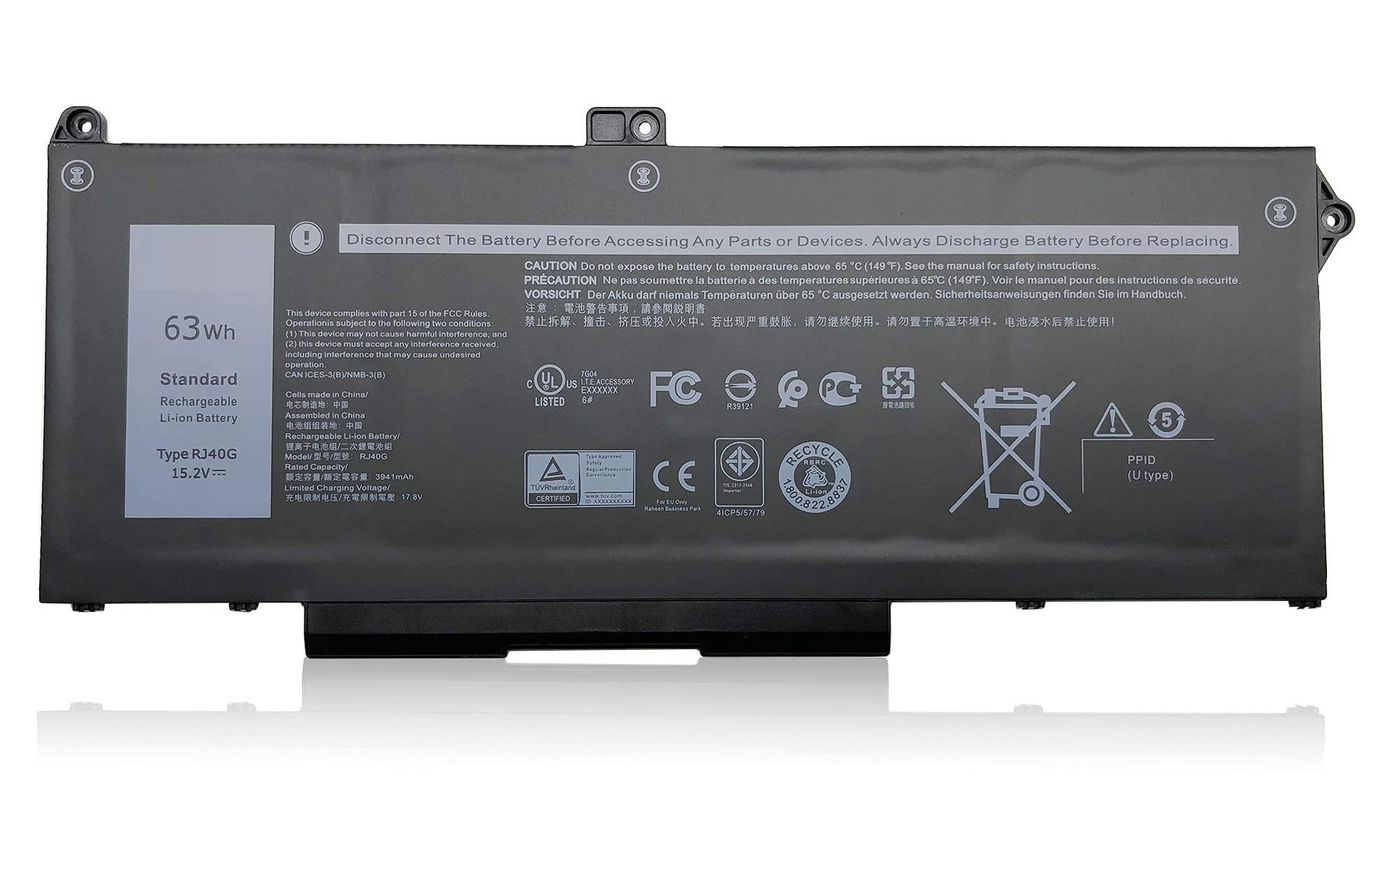 CoreParts MBXDE-BA0281 W128821392 Laptop Battery for Dell 